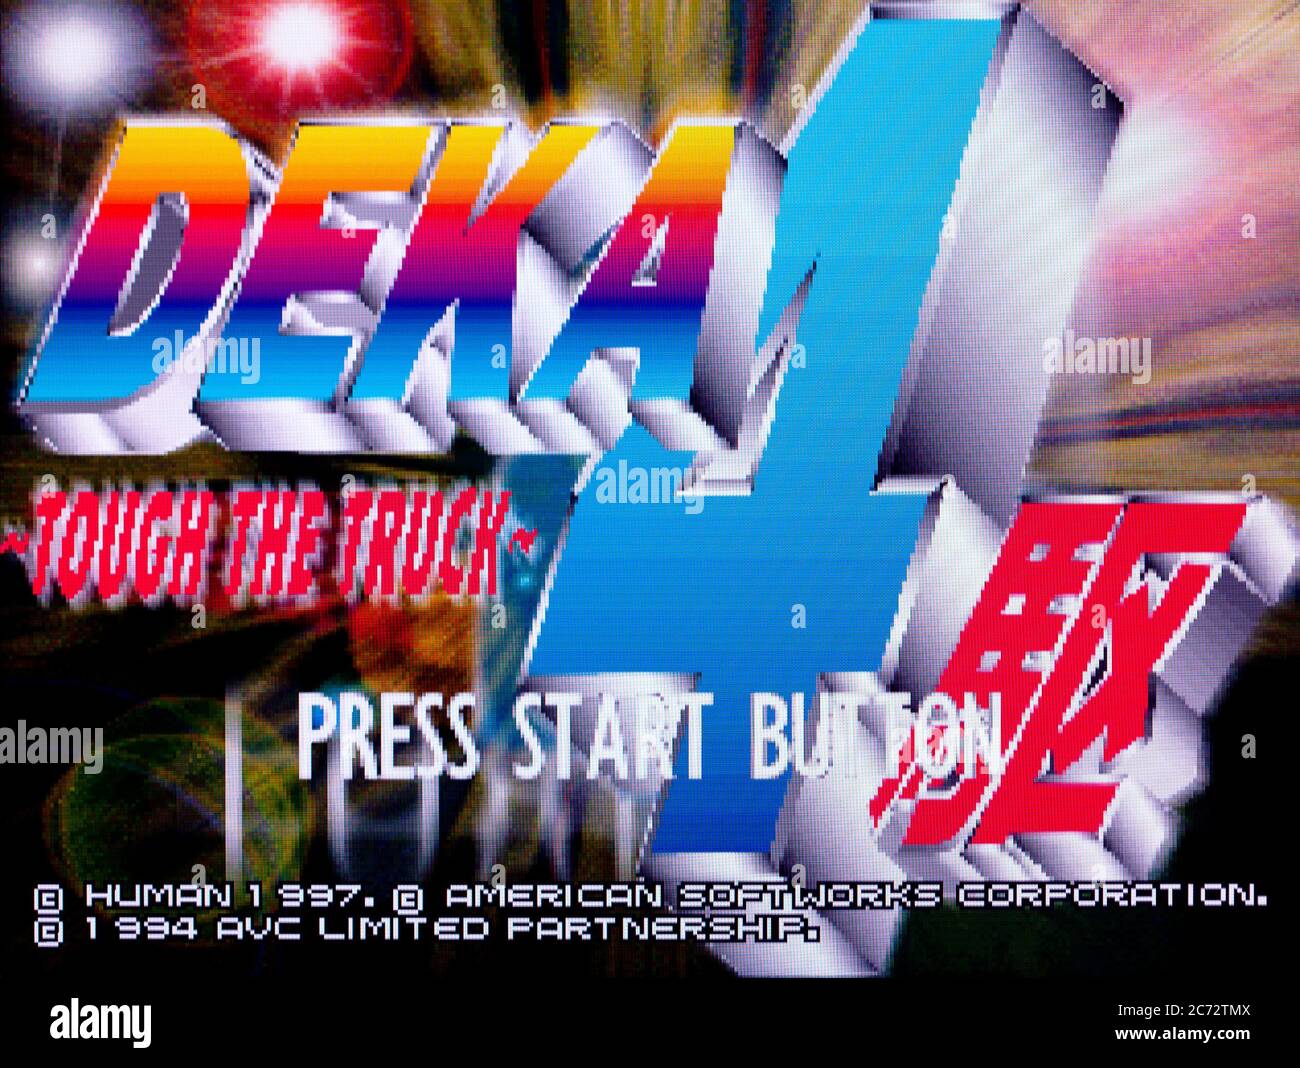 Page 2 Deka High Resolution Stock Photography And Images Alamy